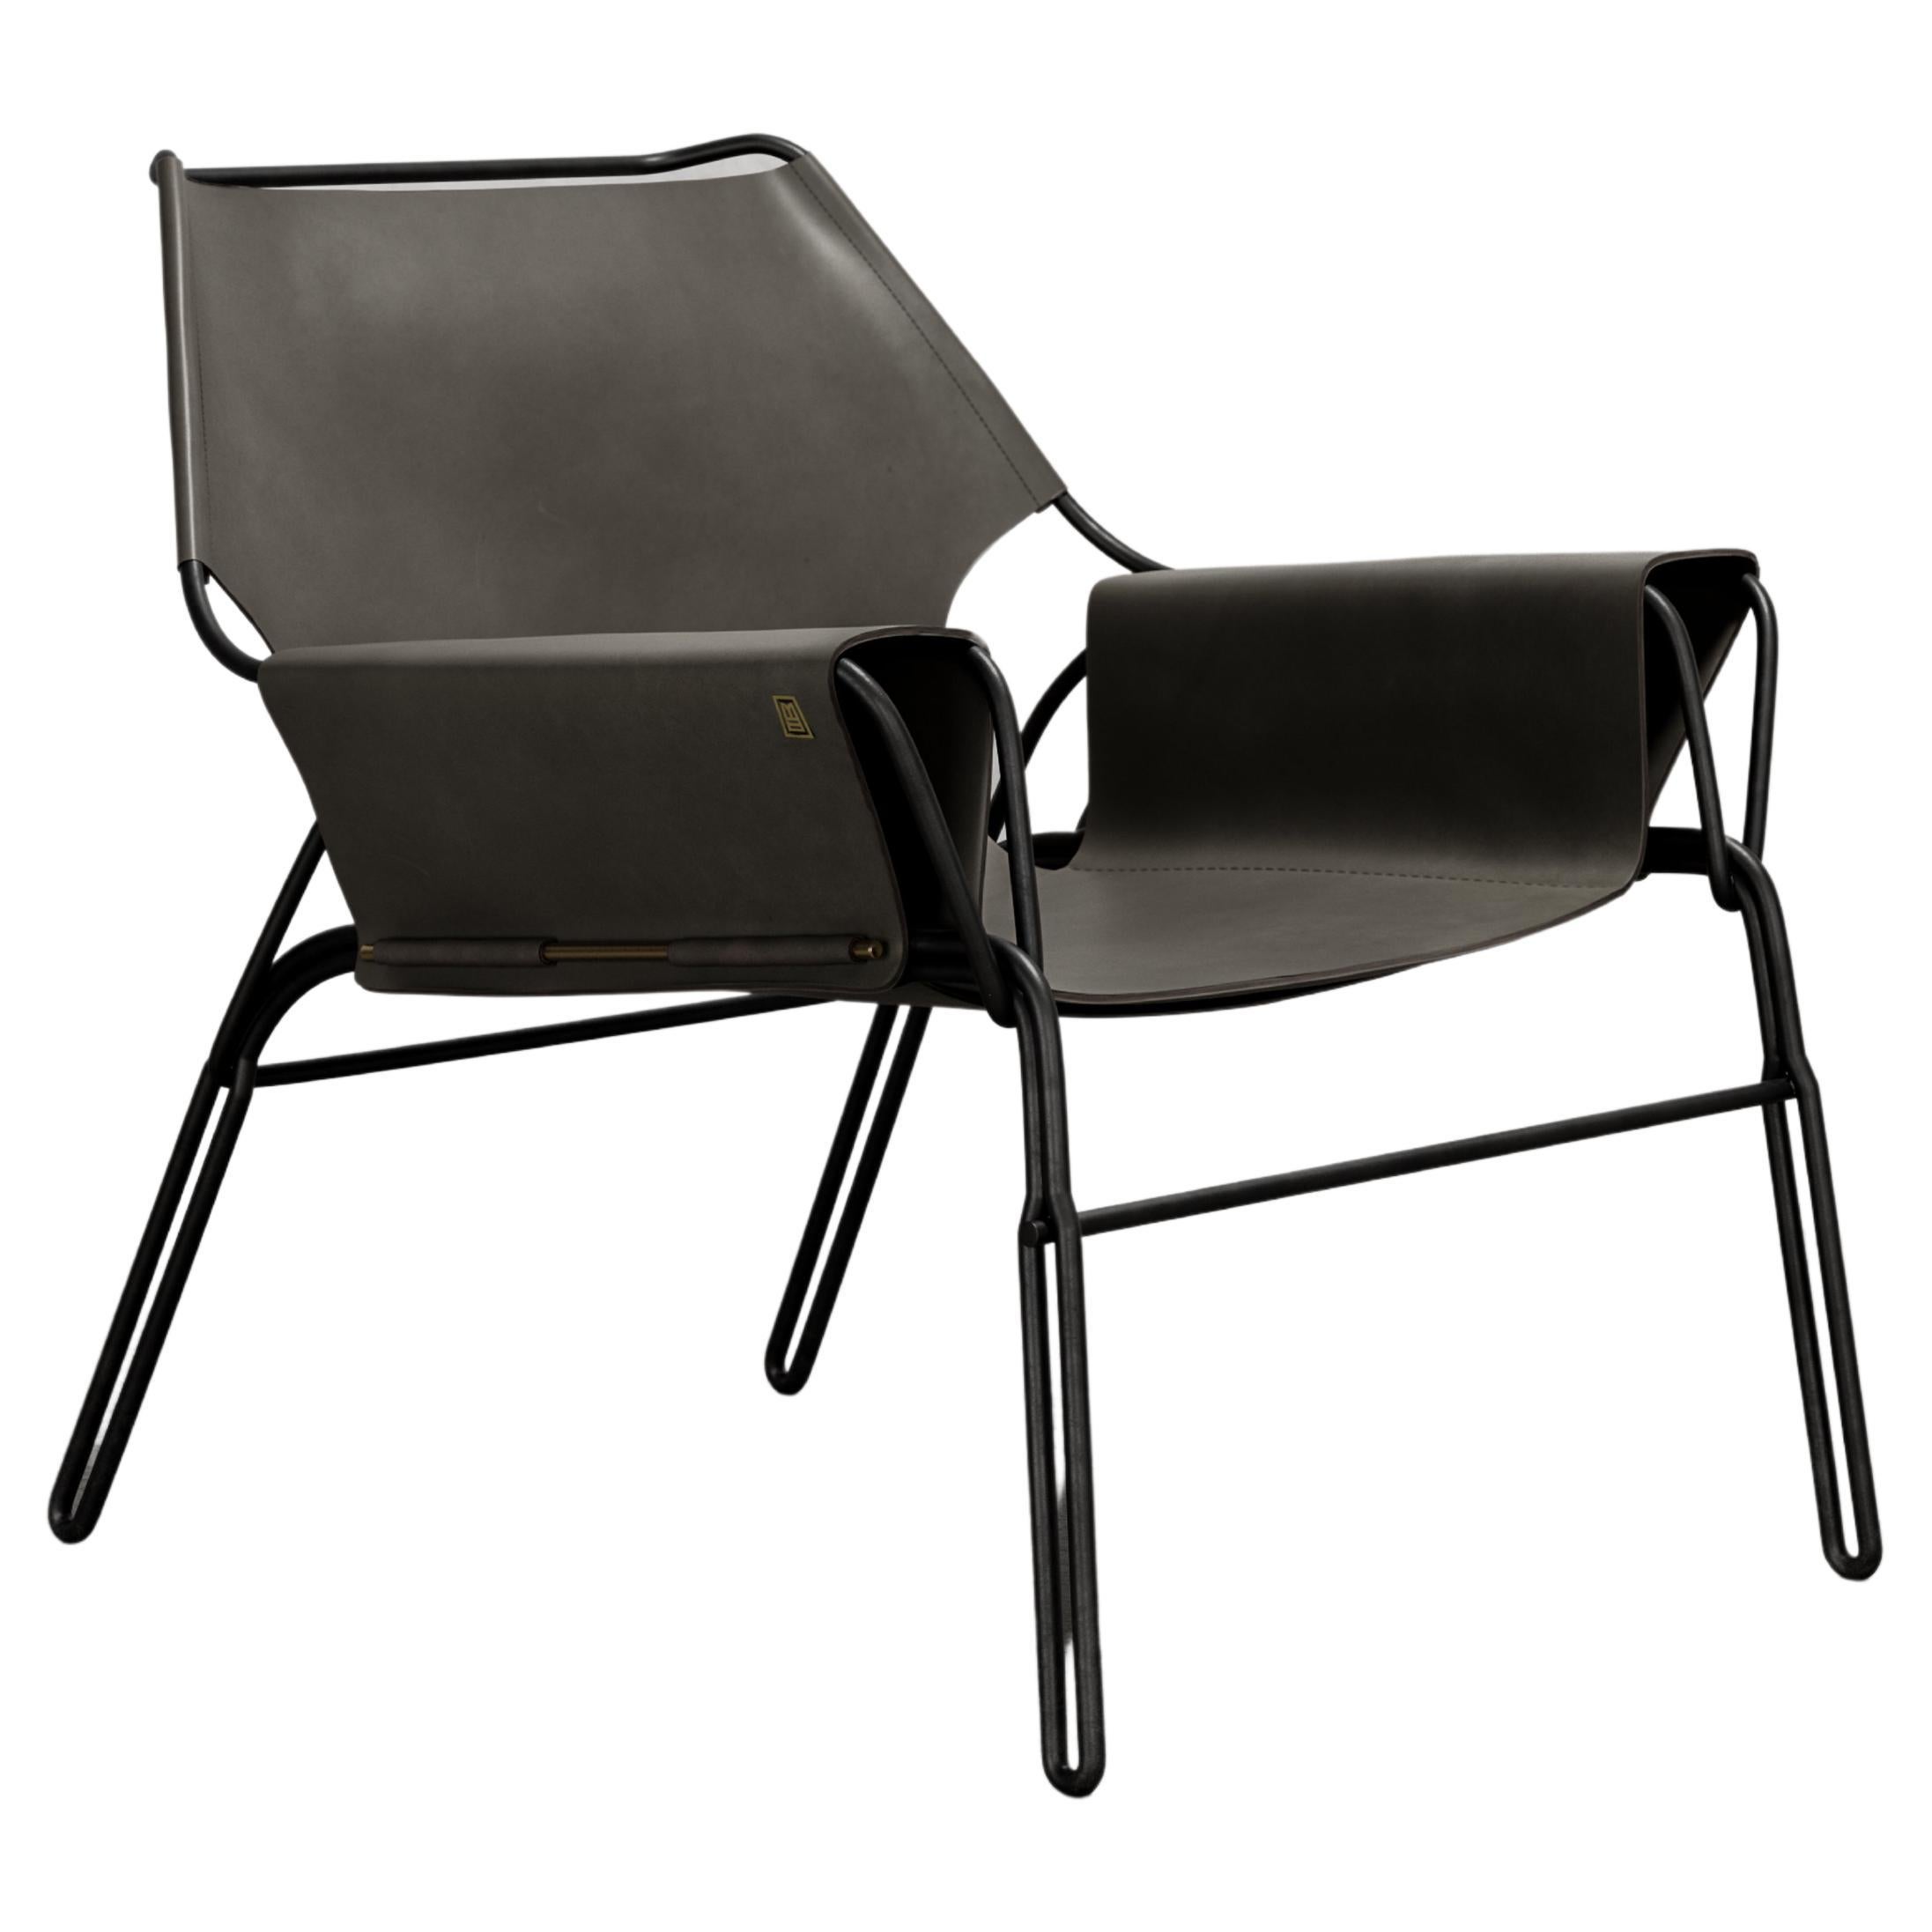 PERFIDIA_02 Olivo Thick Leather Sling Lounge Chair in Black Steel by ANDEAN For Sale